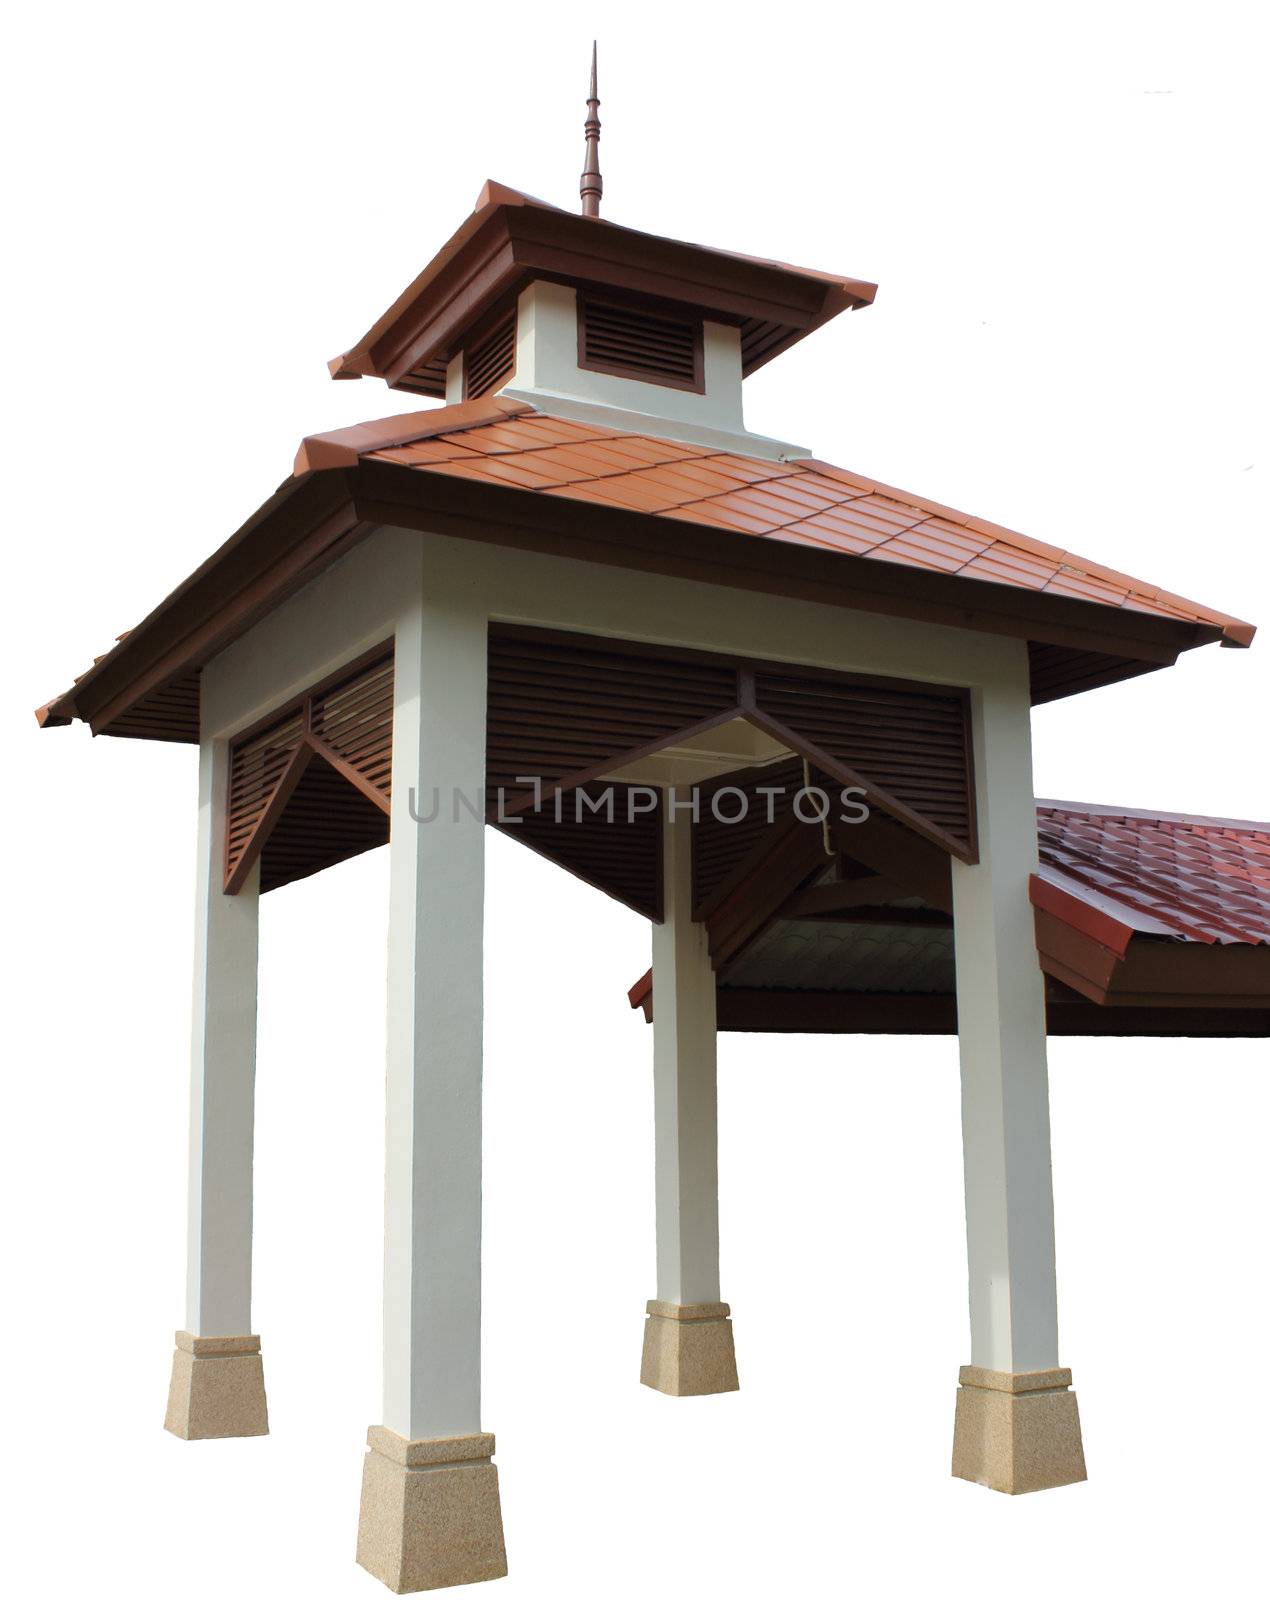 A wayside shelter for footpath is public building in university at Thailand